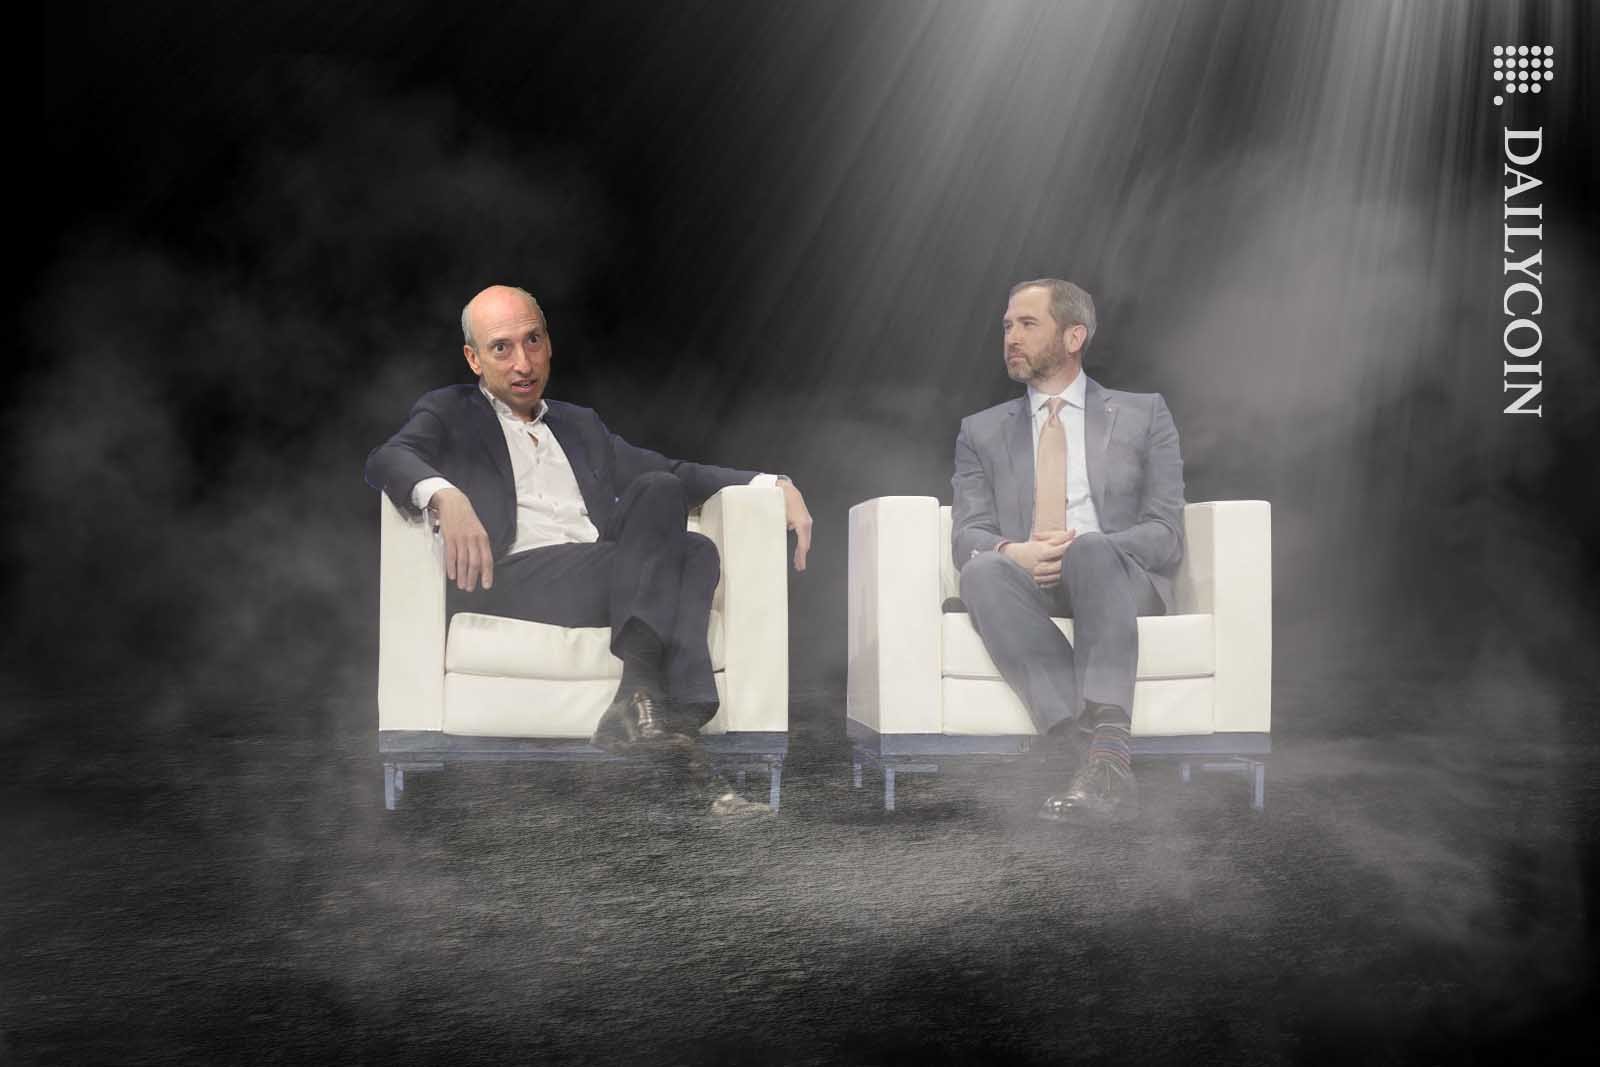 Bred Garlinghouse and Gary Gensler having a conversation.